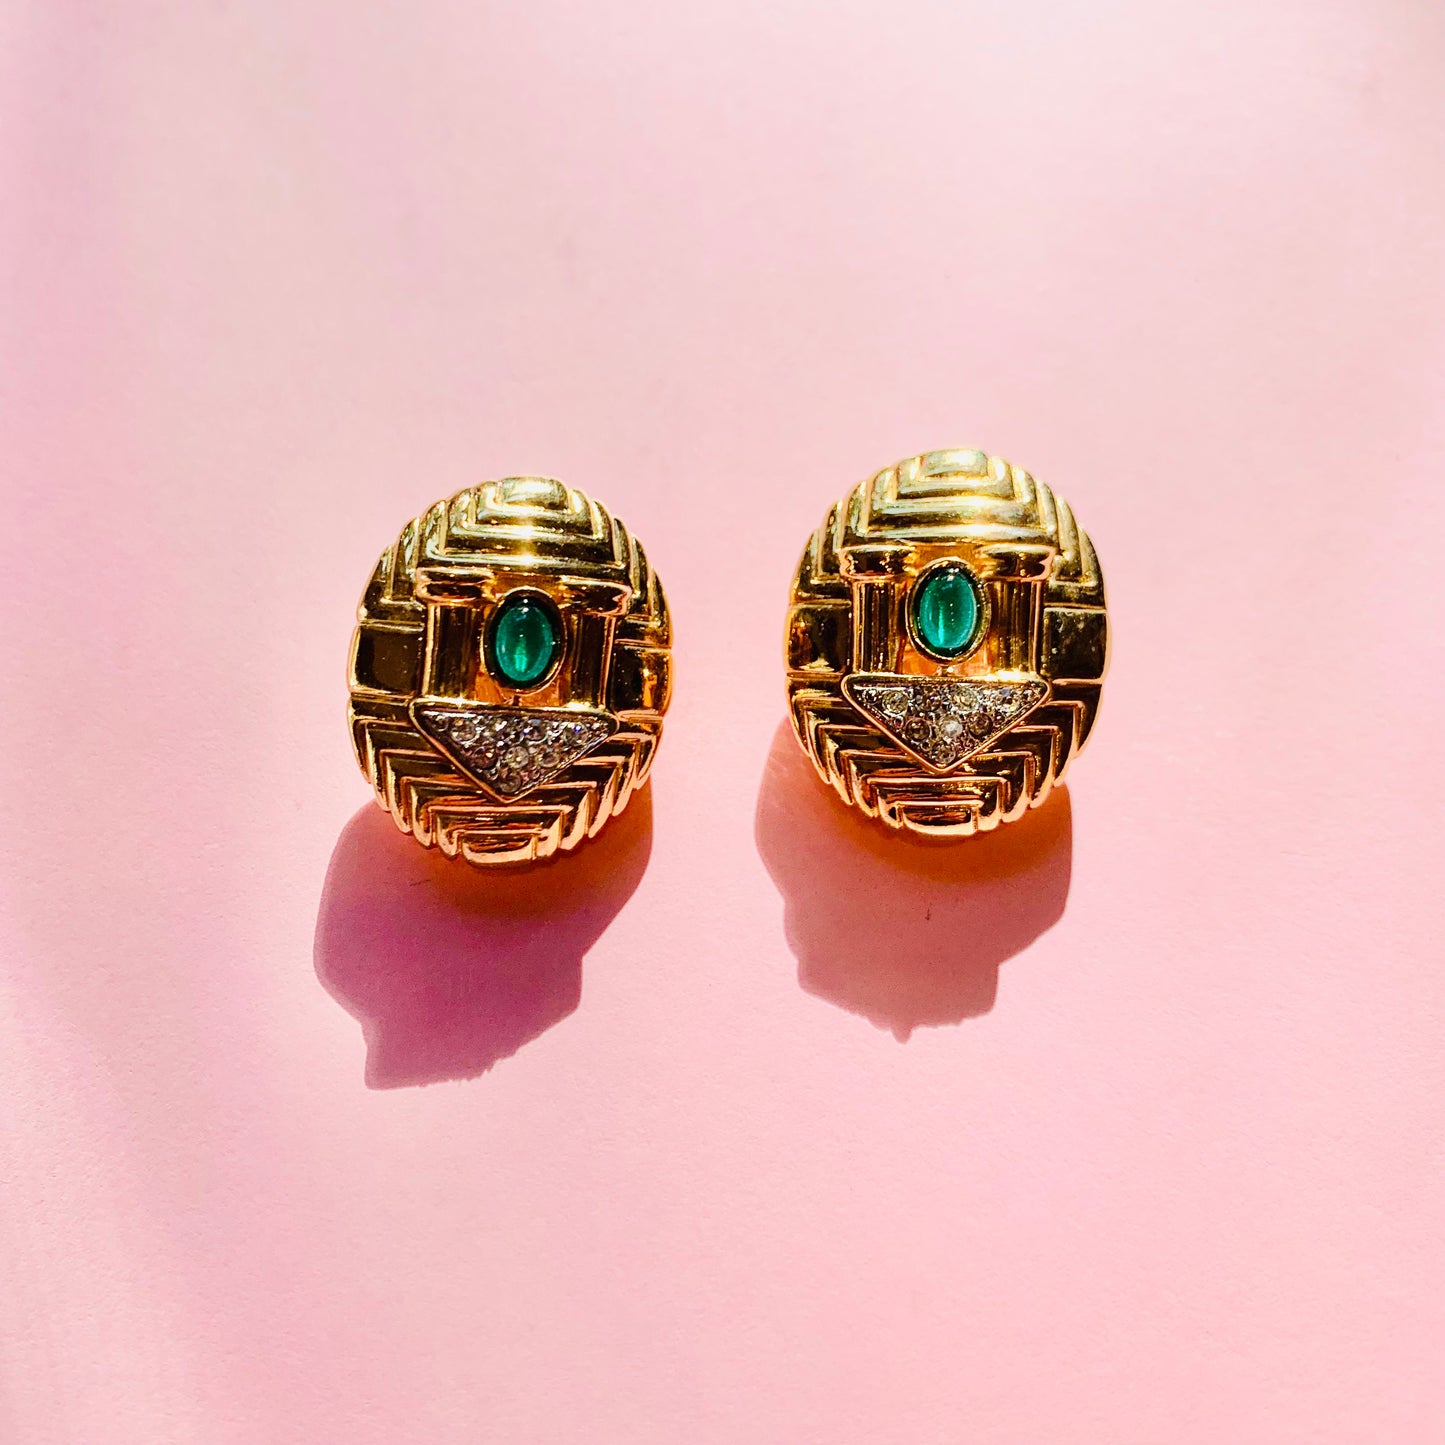 Extremely rare 1940s gold plated clip on earrings with green cabochon paste